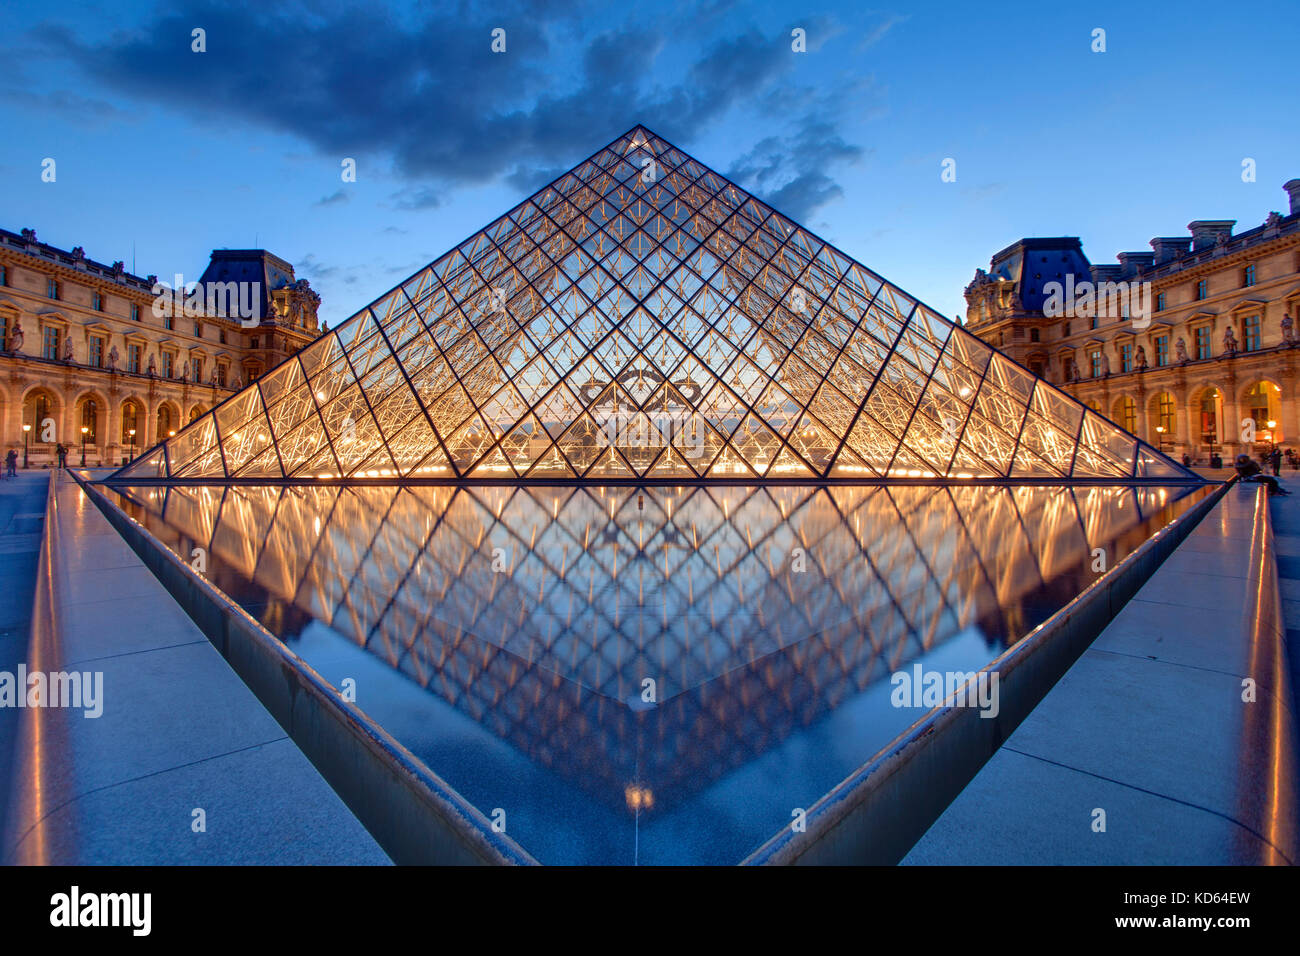 Paris (France): the Louvre Pyramid, a large glass and metal pyramid at the entrance to the museum, designed by architect I.M. Pei, here lit up at nigh Stock Photo